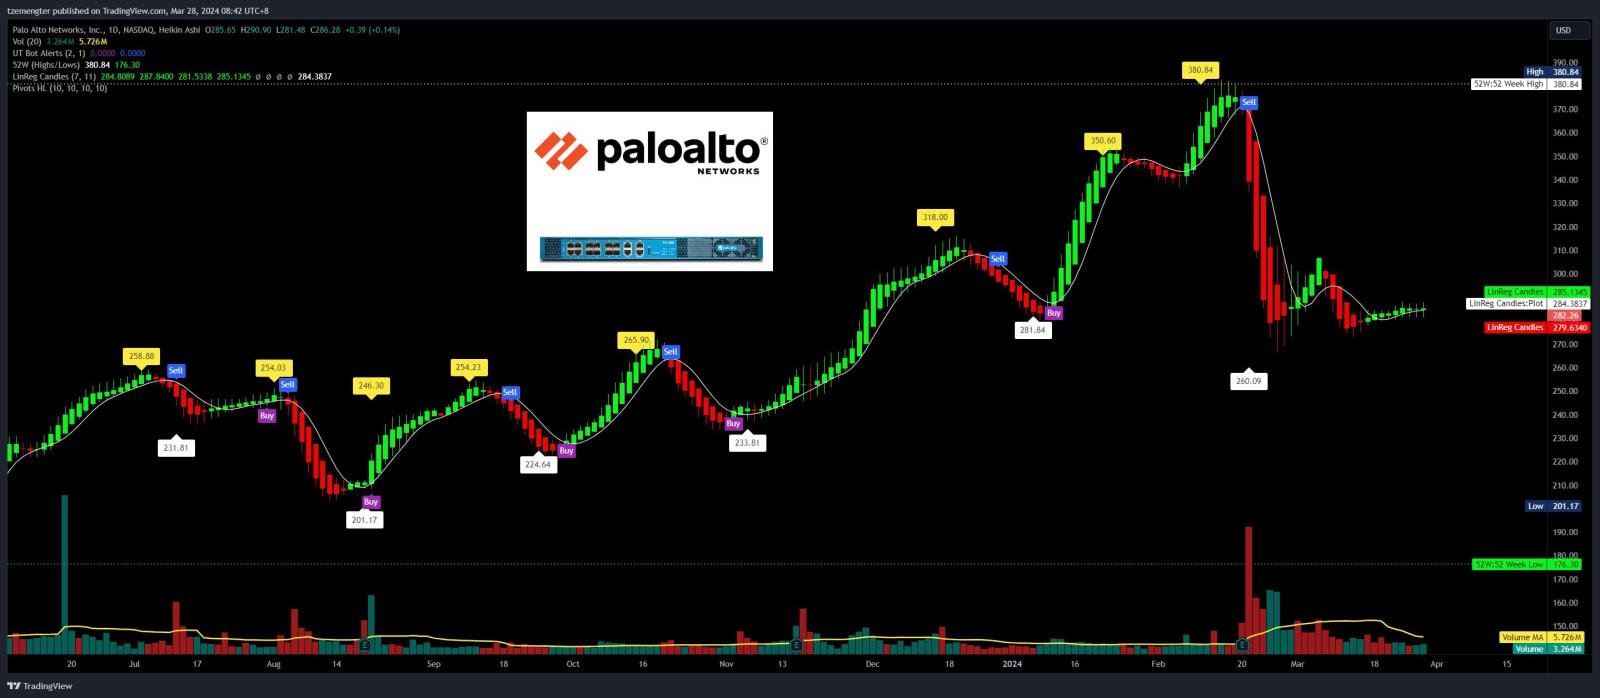 $Palo Alto Networks (PANW.US)$ holding at support zone.